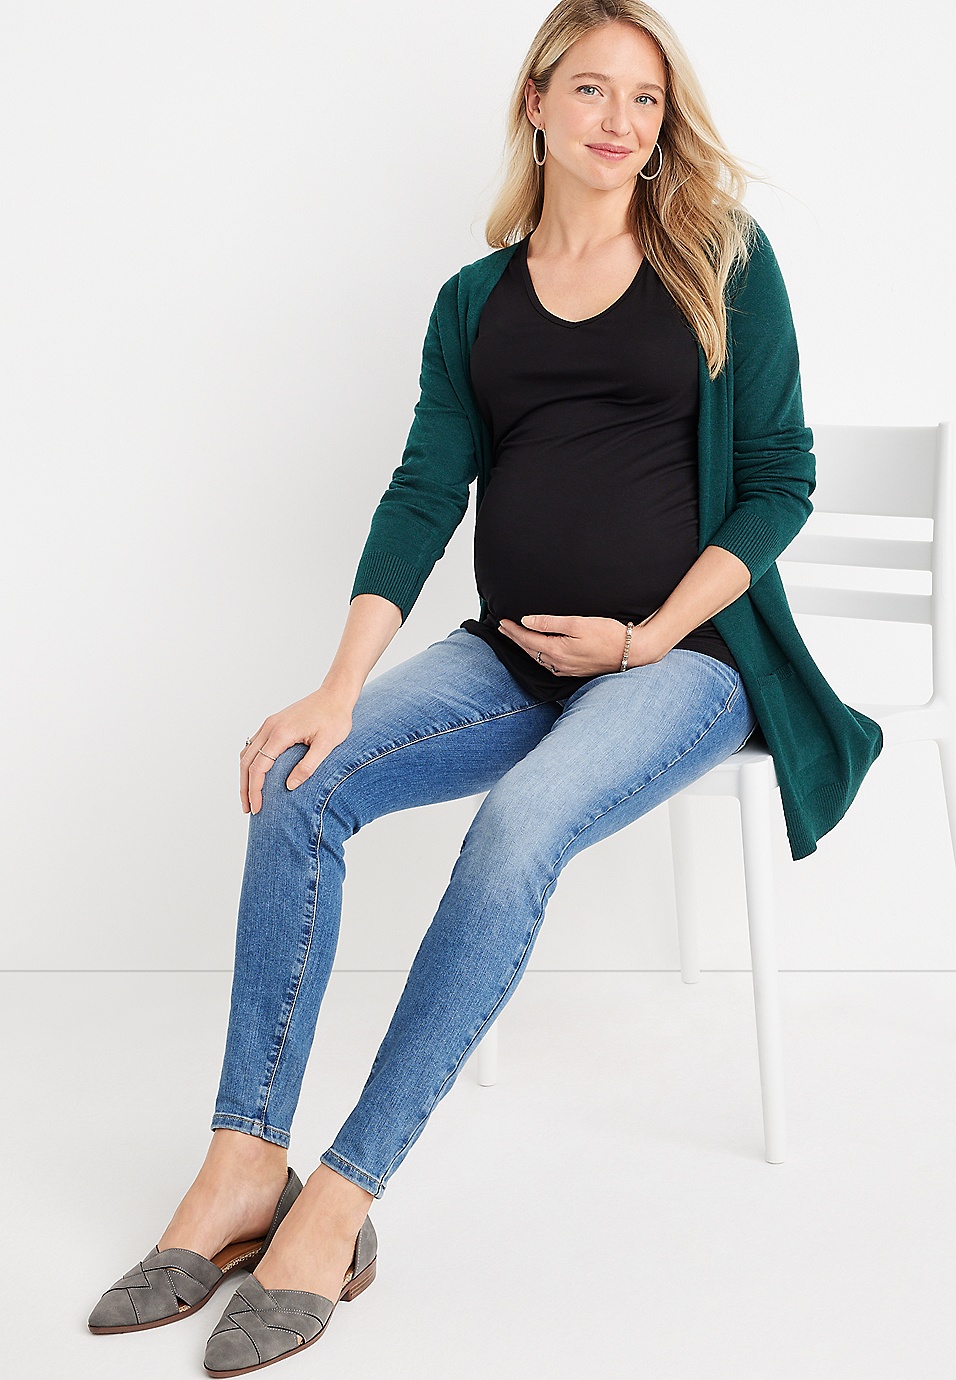 m jeans by maurices™ Everflex™ Super Skinny Side Panel Maternity